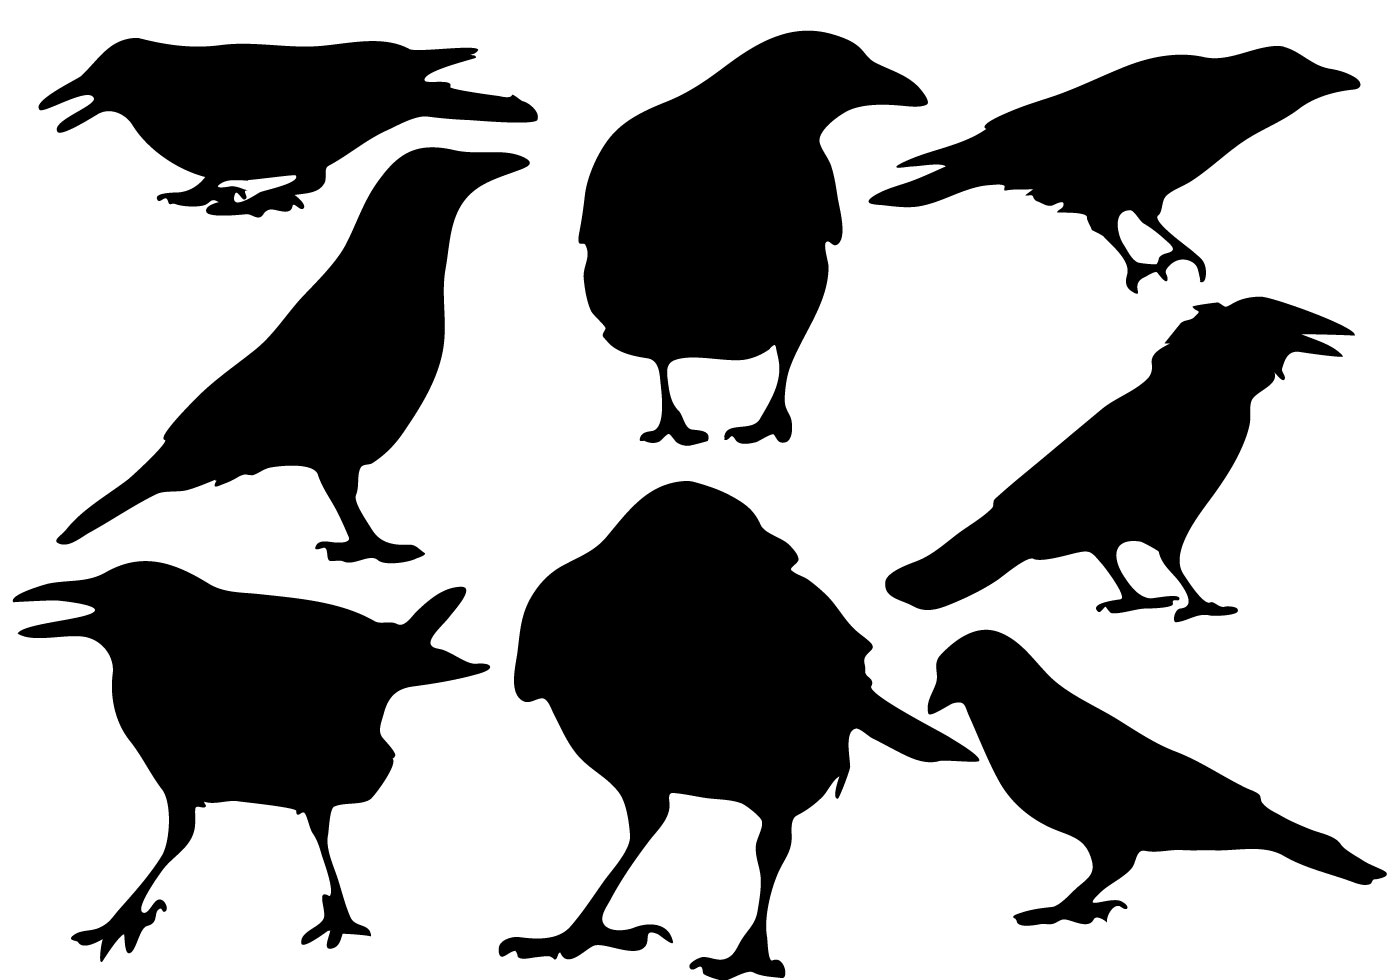 Free Raven Silhouette Vector - Download Free Vector Art, Stock Graphics & Images